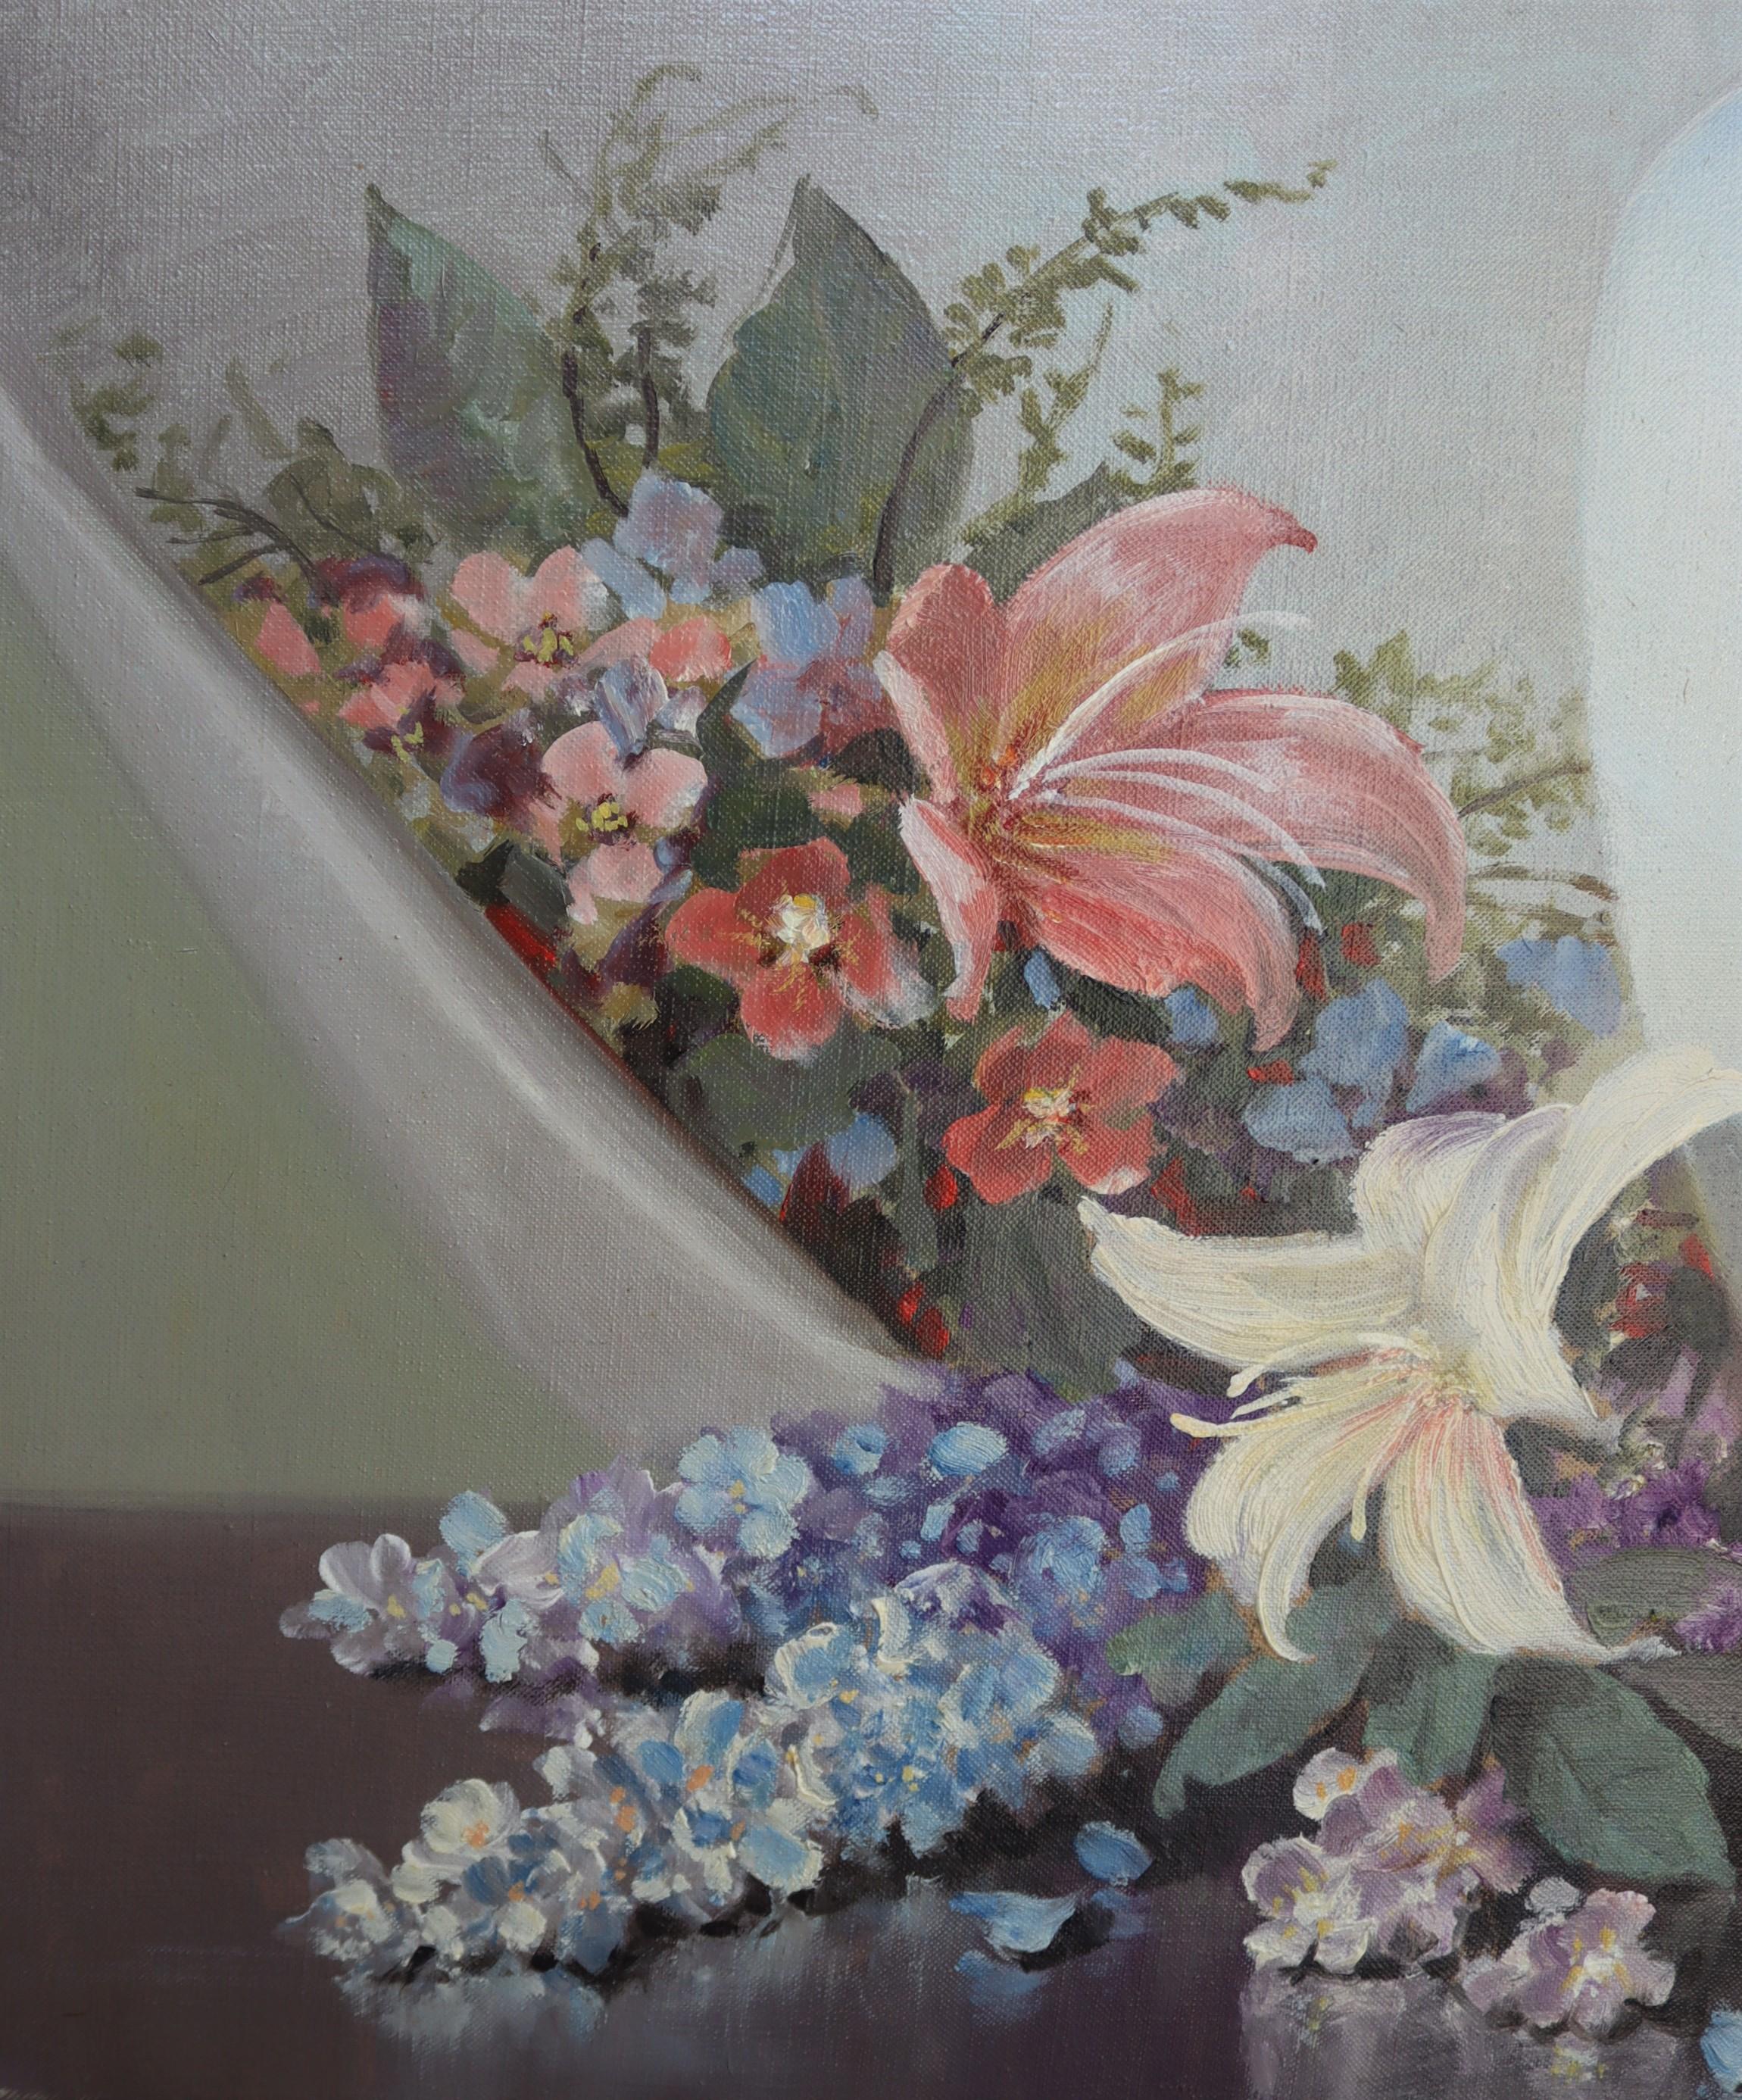 Floral Still-life with Light Blue Vase - Painting by A.D. Greer